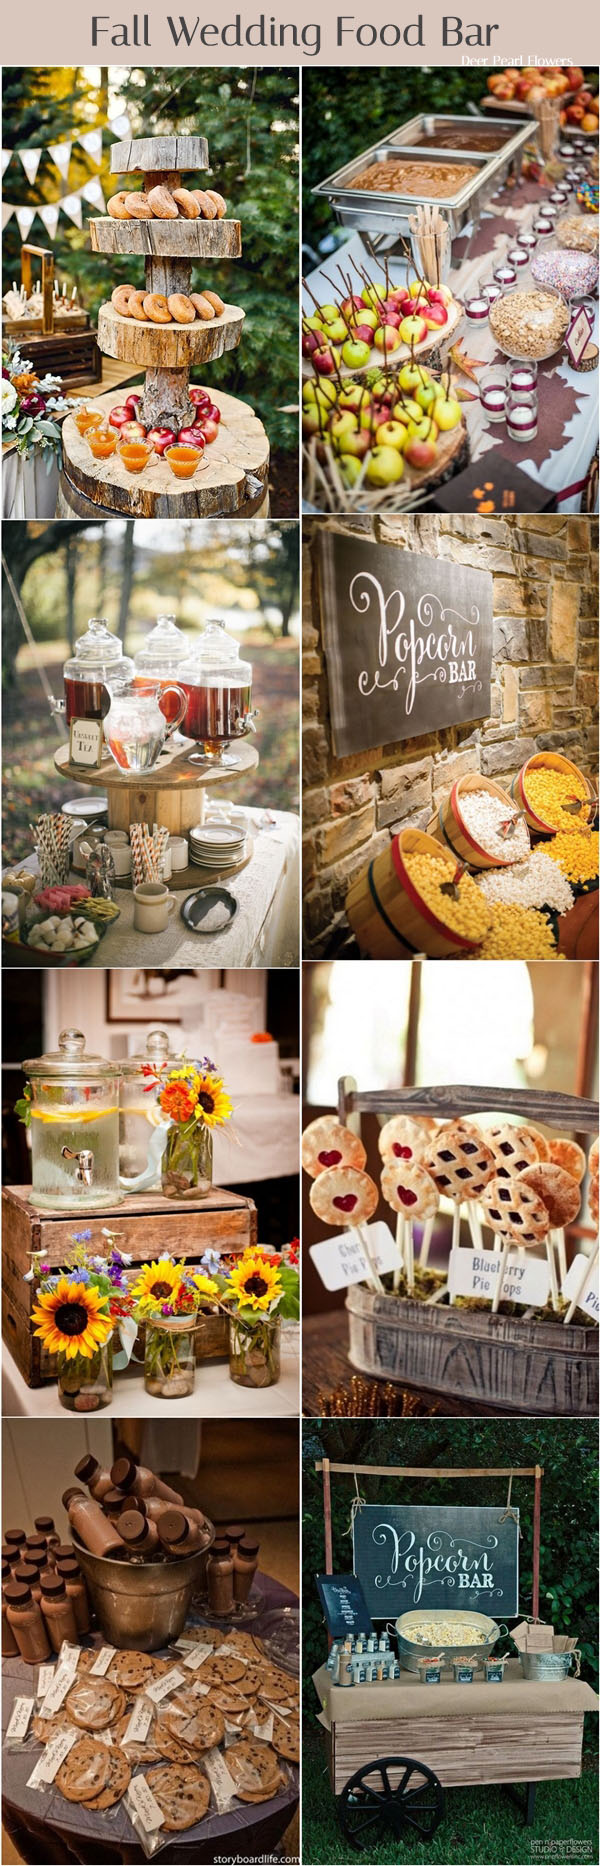 76 Of The Best Fall Wedding Ideas For 2019 Deer Pearl Flowers